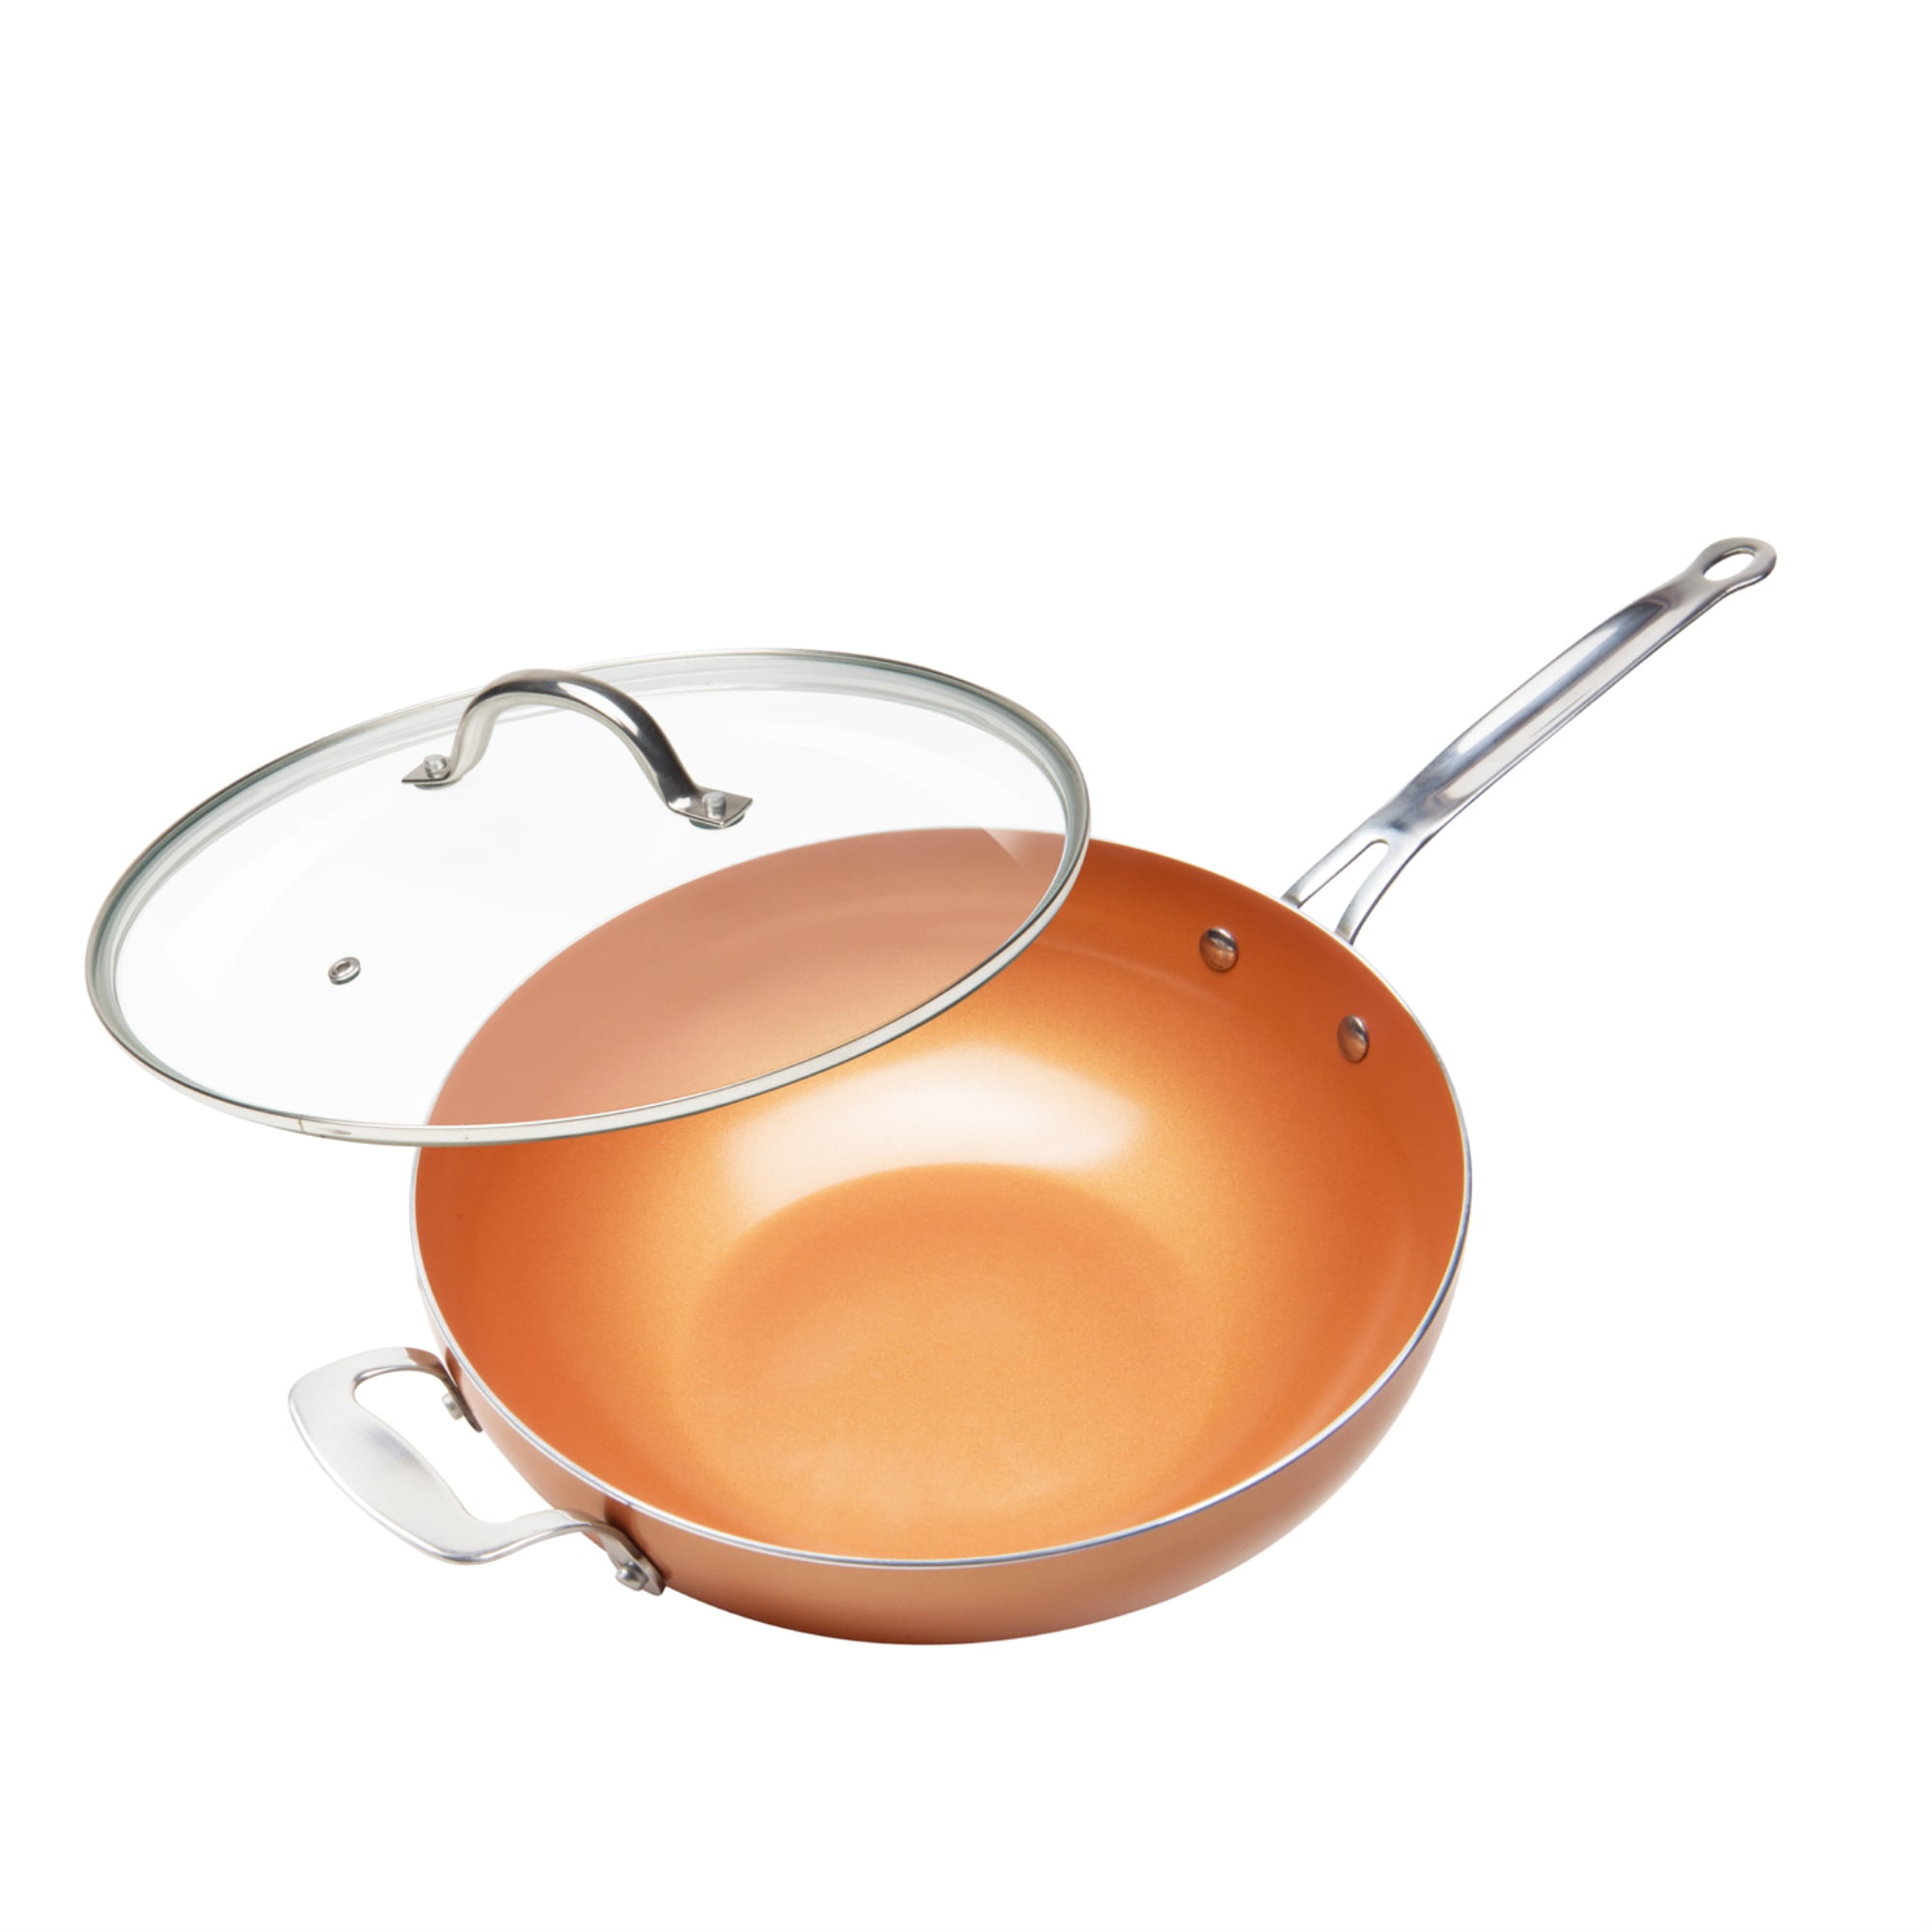 Nonstick Ceramic Copper 12 Inch Wok and Stir Fry 12'' Nonstick Wok with Lid 